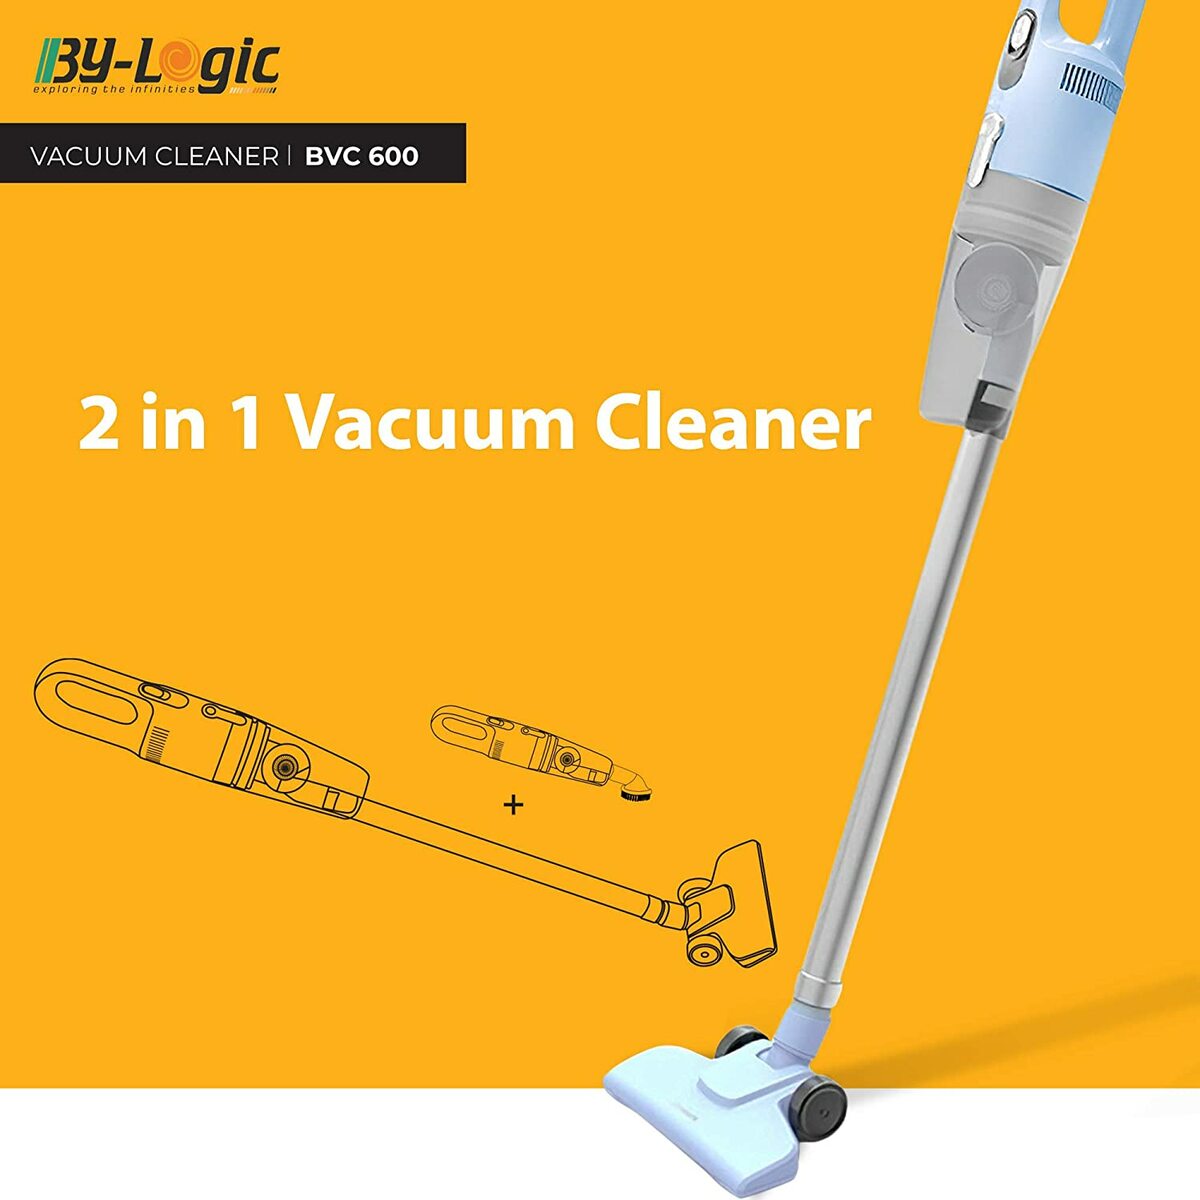 BY Logic Vacuum Cleaner BVC 600